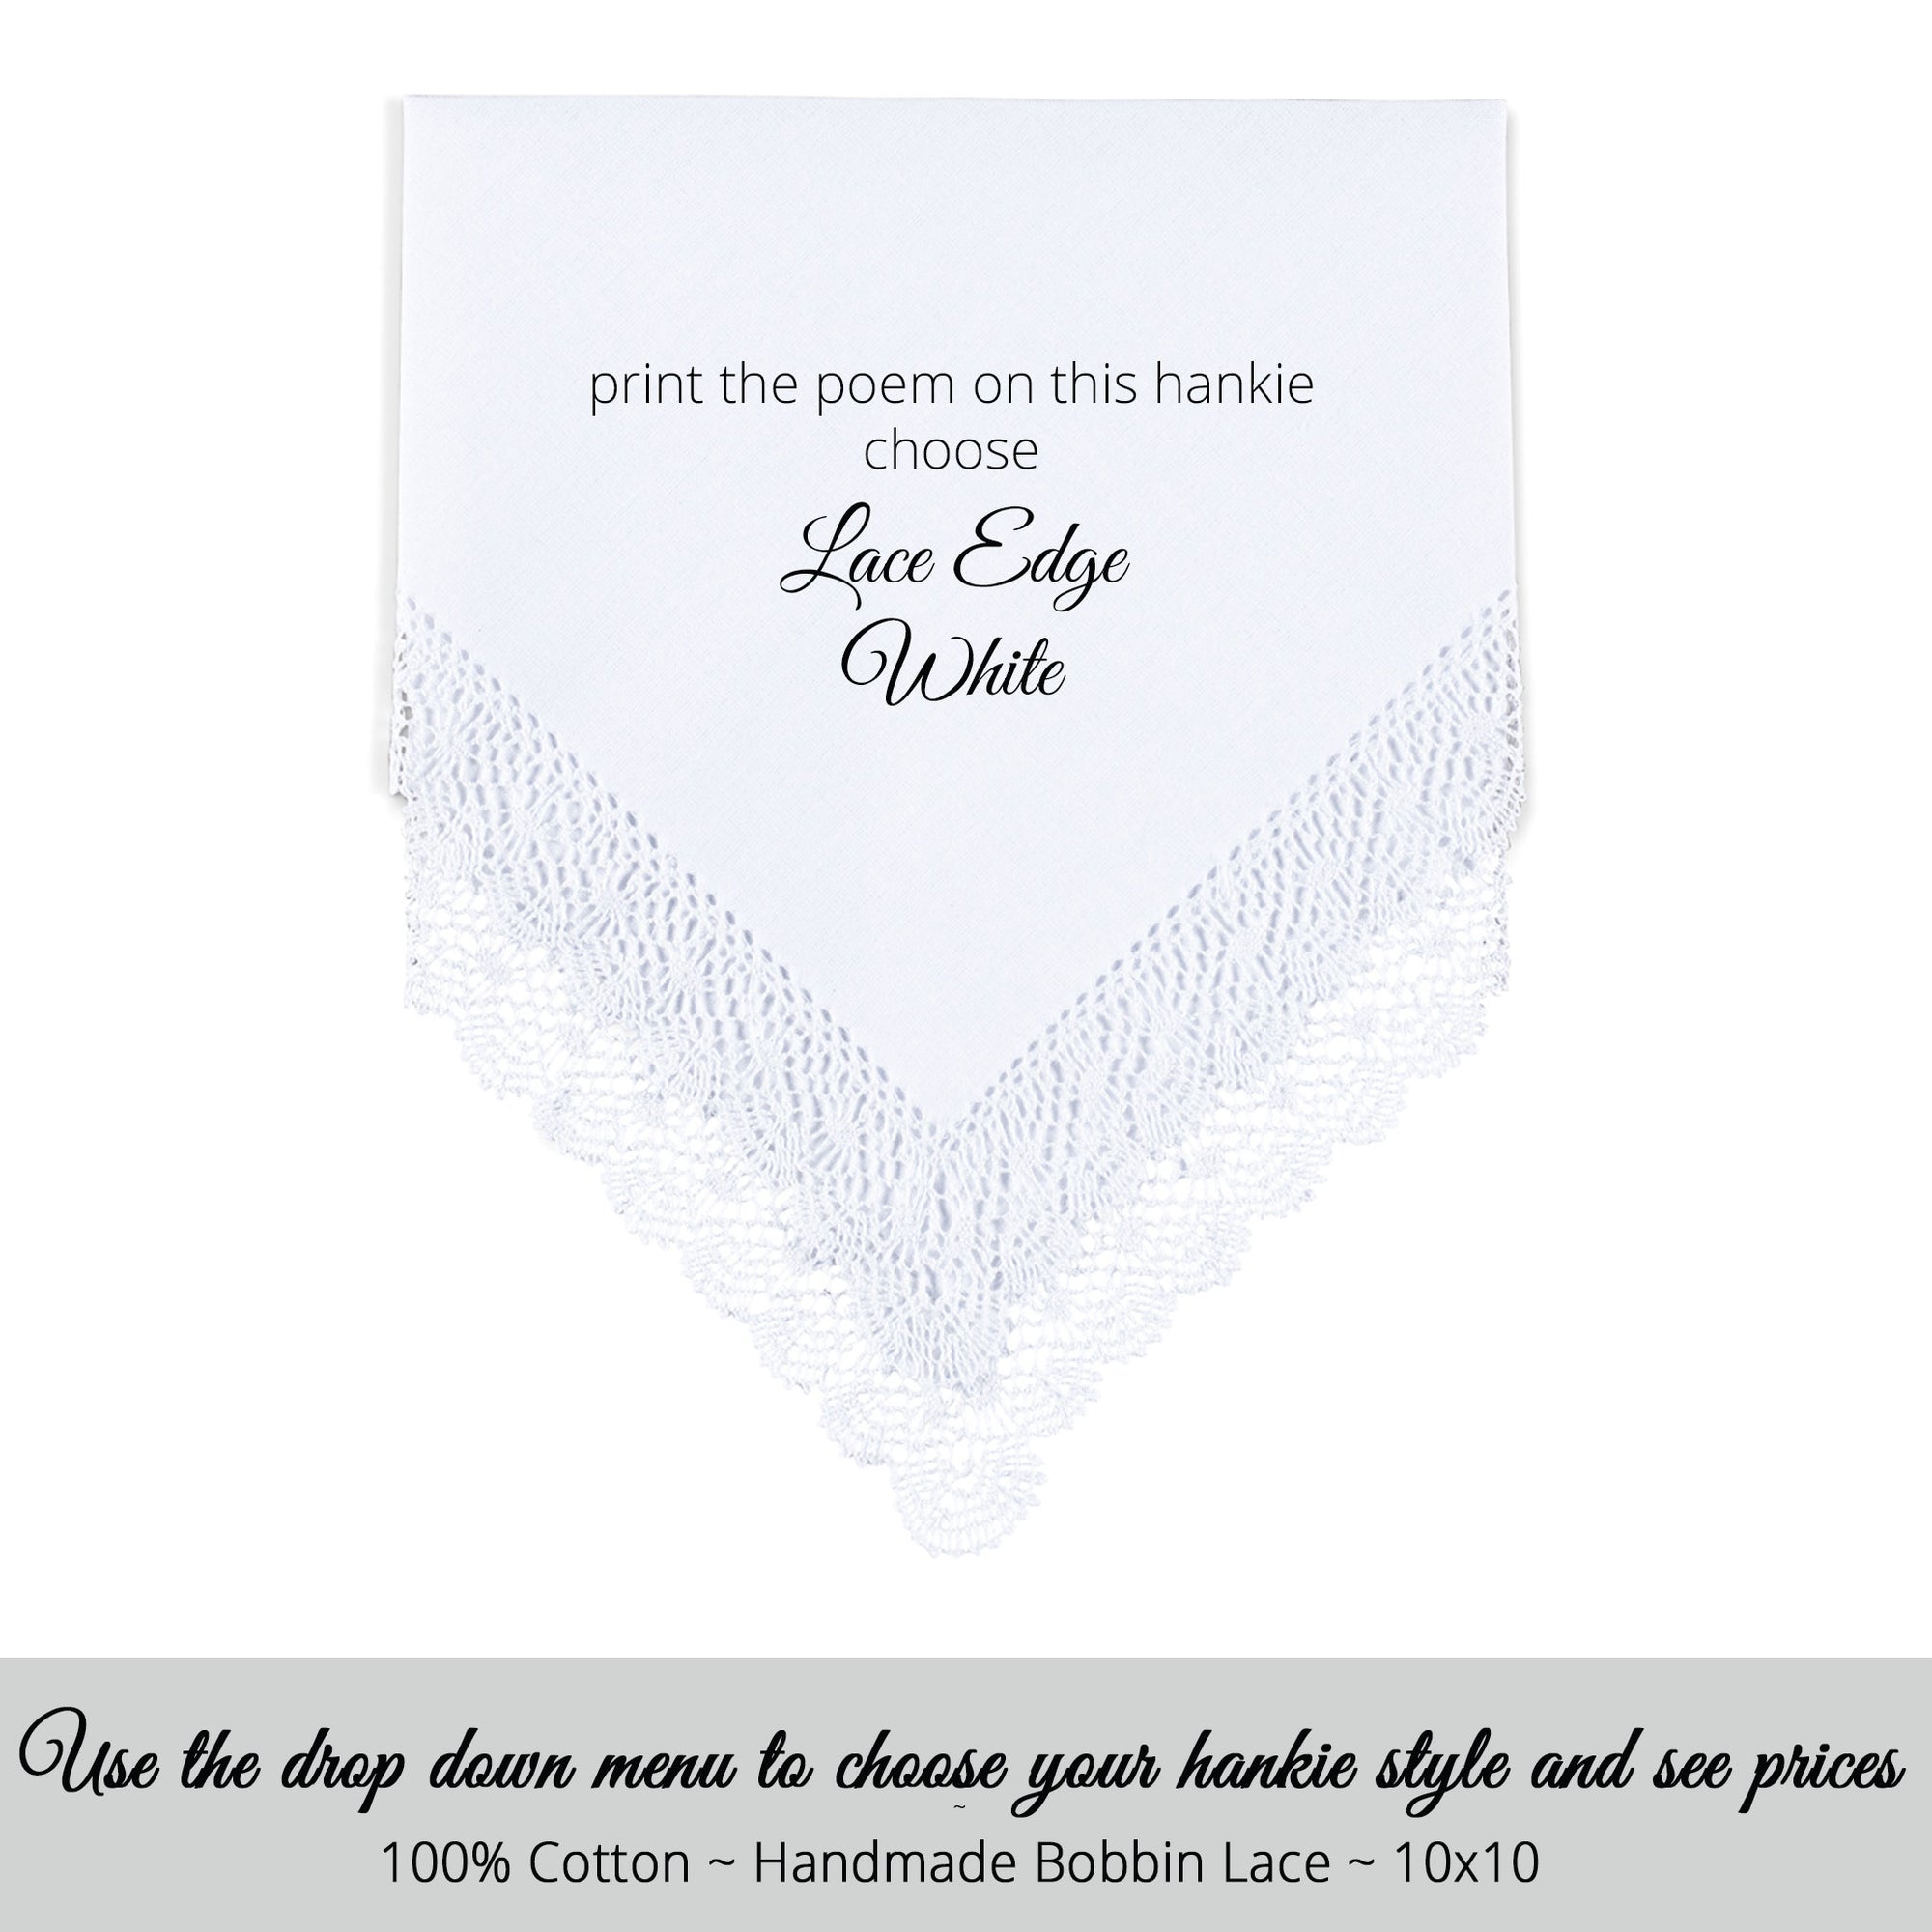 Wedding Handkerchief white with bobbin lace poem printed hankie for the mother of the groom